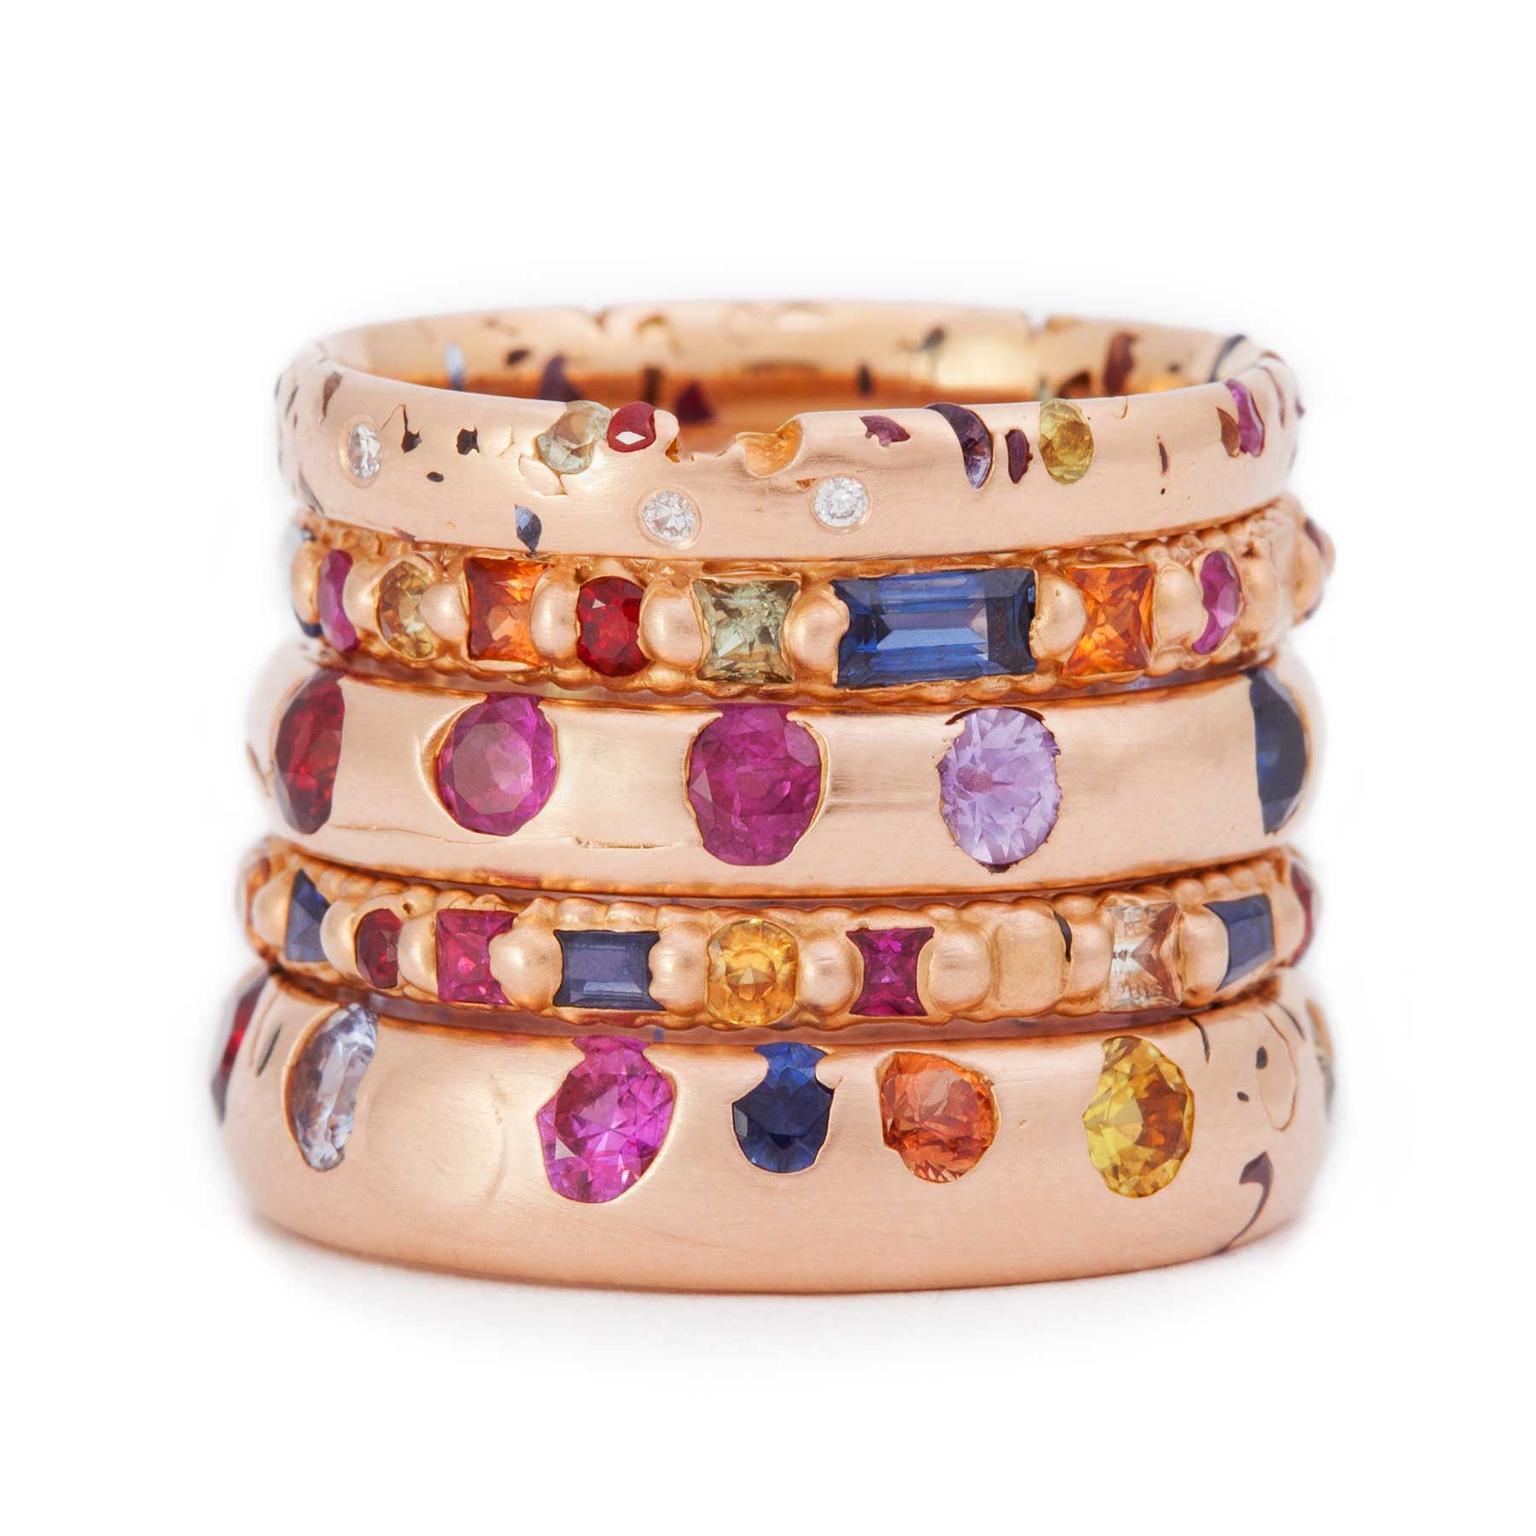 Polly Wales coloured gemstone rings